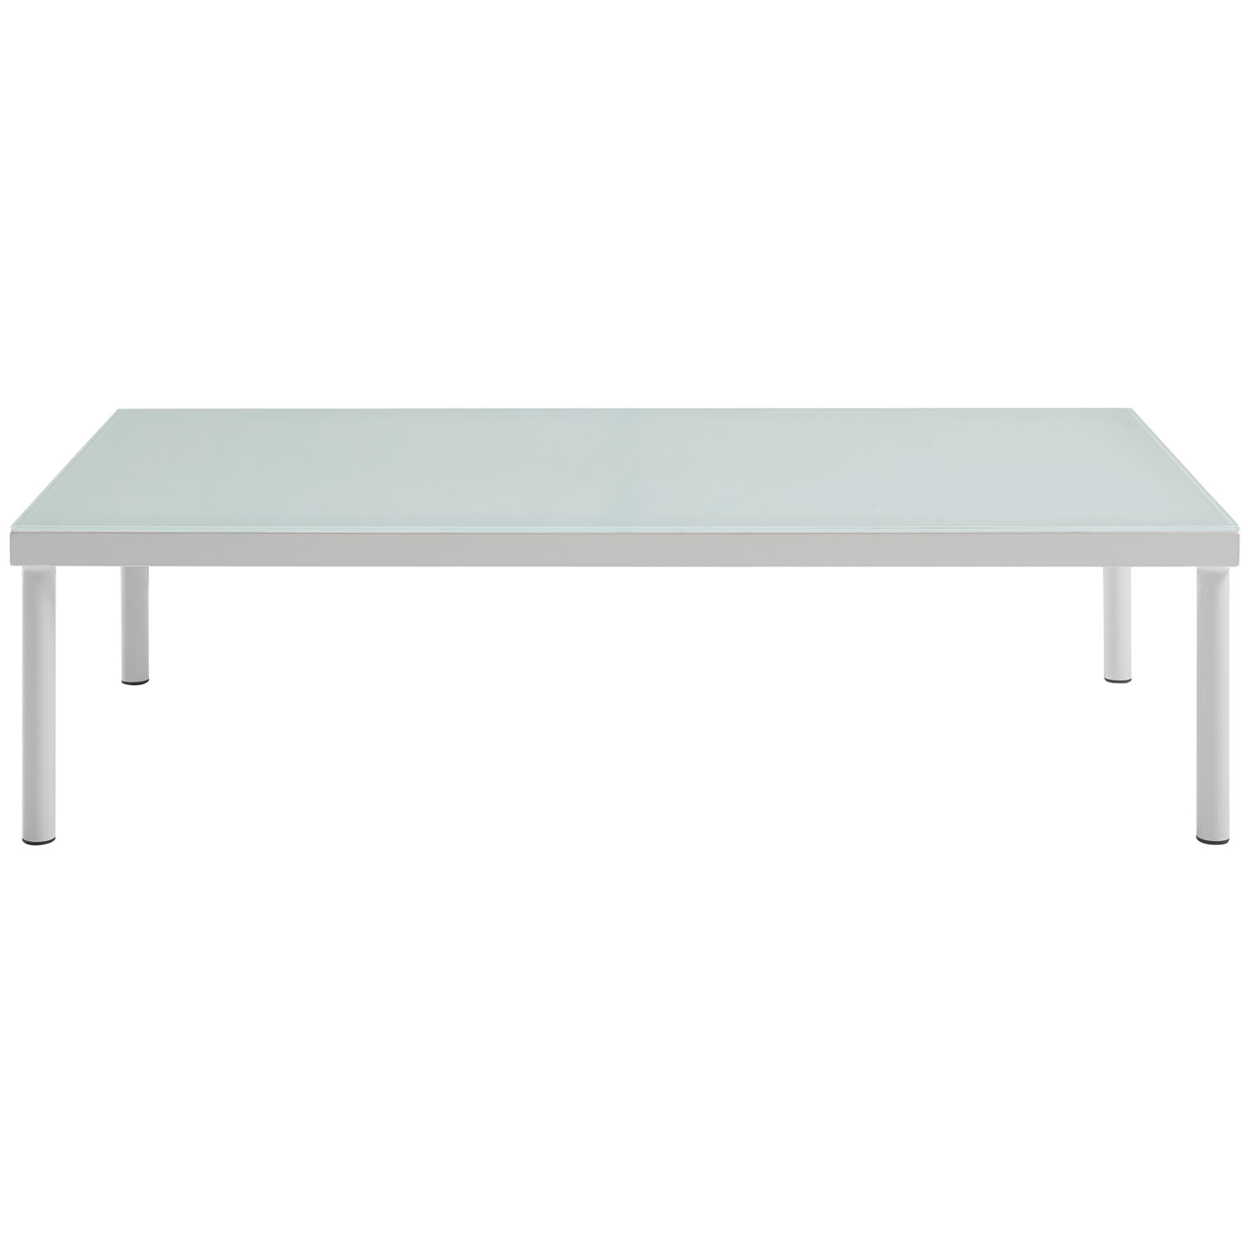 Modway Harmony Outdoor Patio Aluminum and Glass Coffee Table in White - image 2 of 4